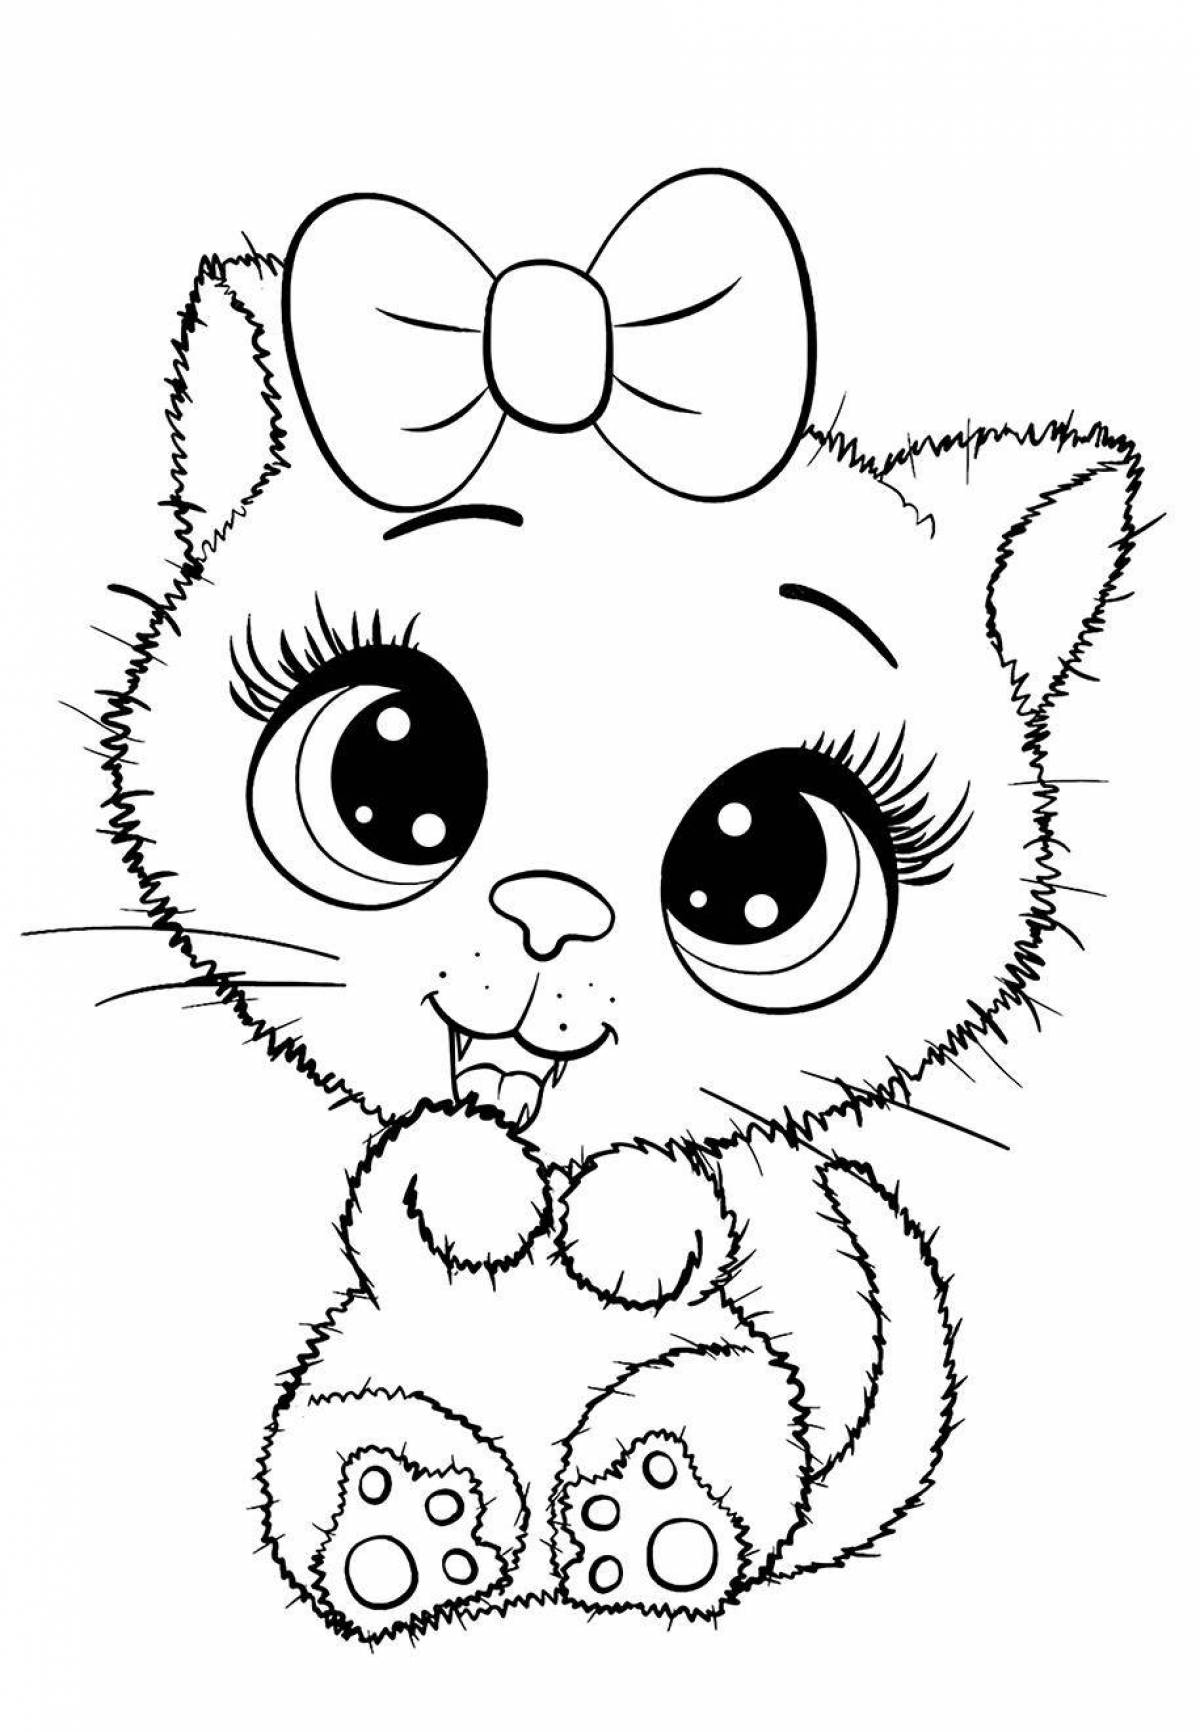 Charming kittens coloring book